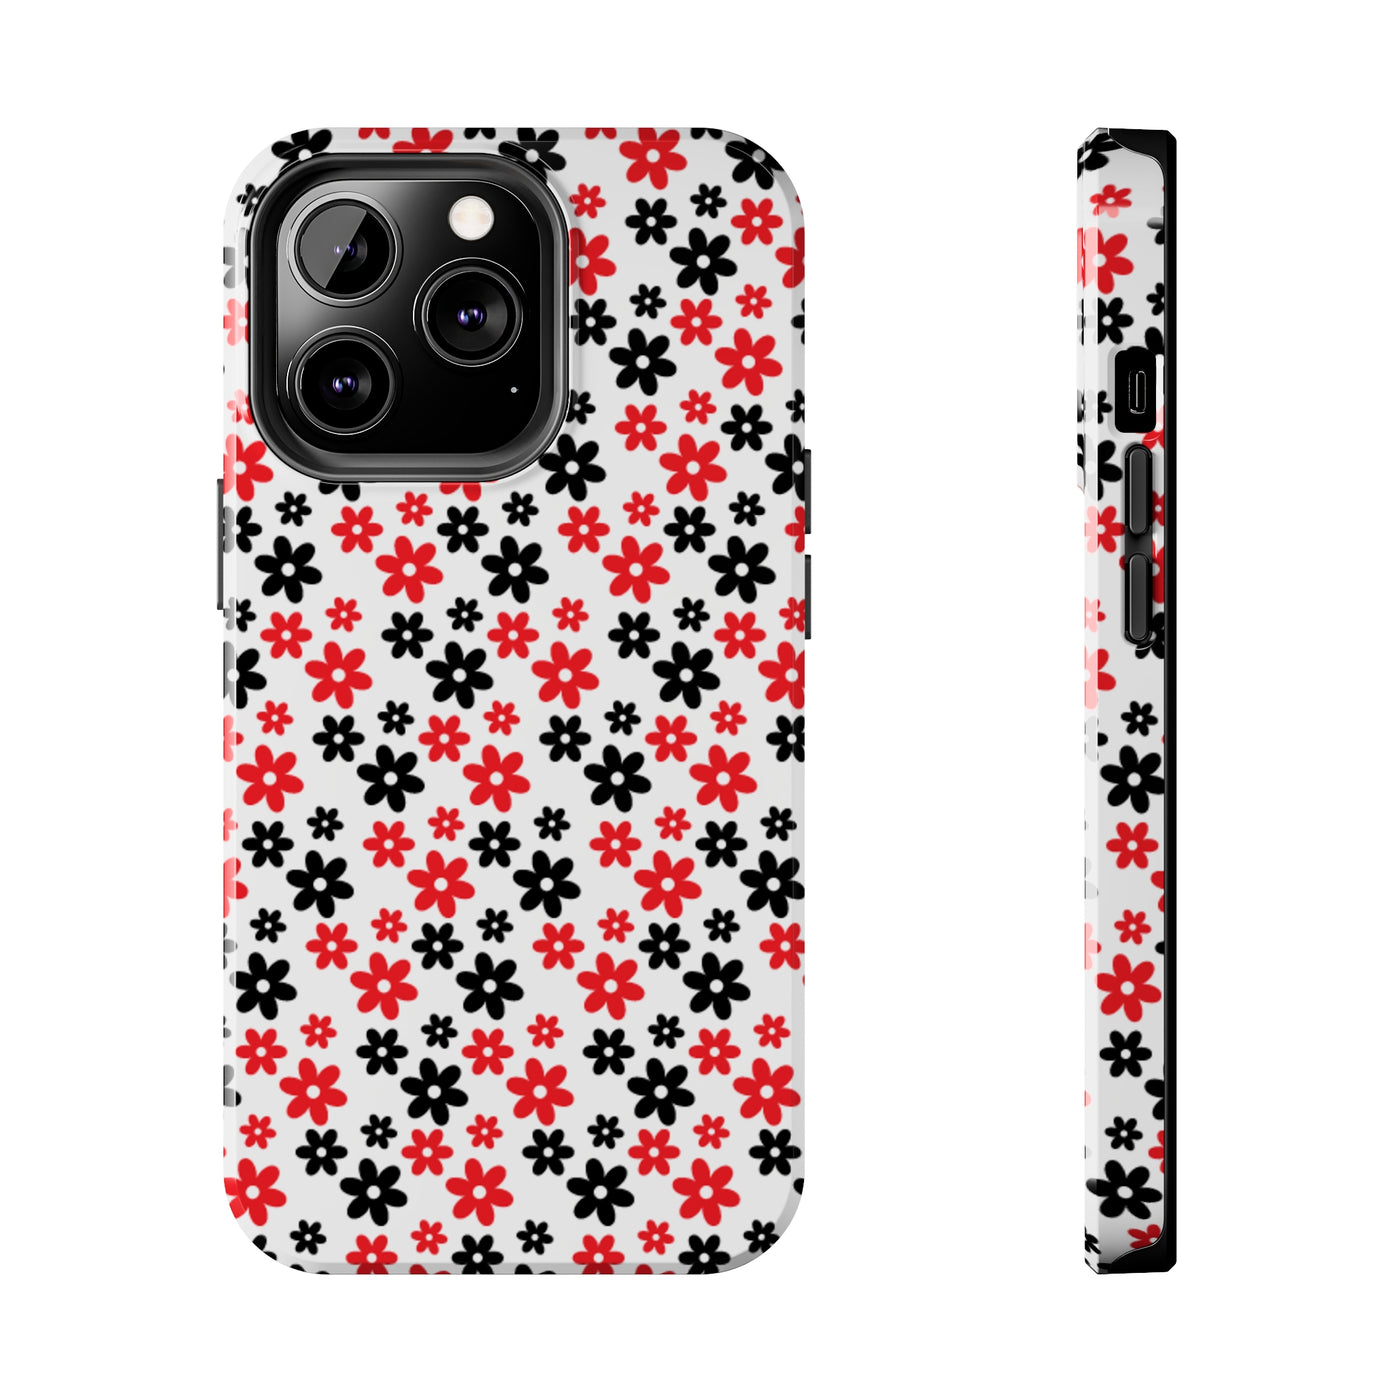 Daisy Flower Iphone Case, Custom phone cases, phone case Inspo, trending phone cases 2023, trending phone cases, aesthetic phone case, bow phone case, phone case ideas, phone case aesthetic, iphone 15 max, Flower phone cover, Red and Black Case